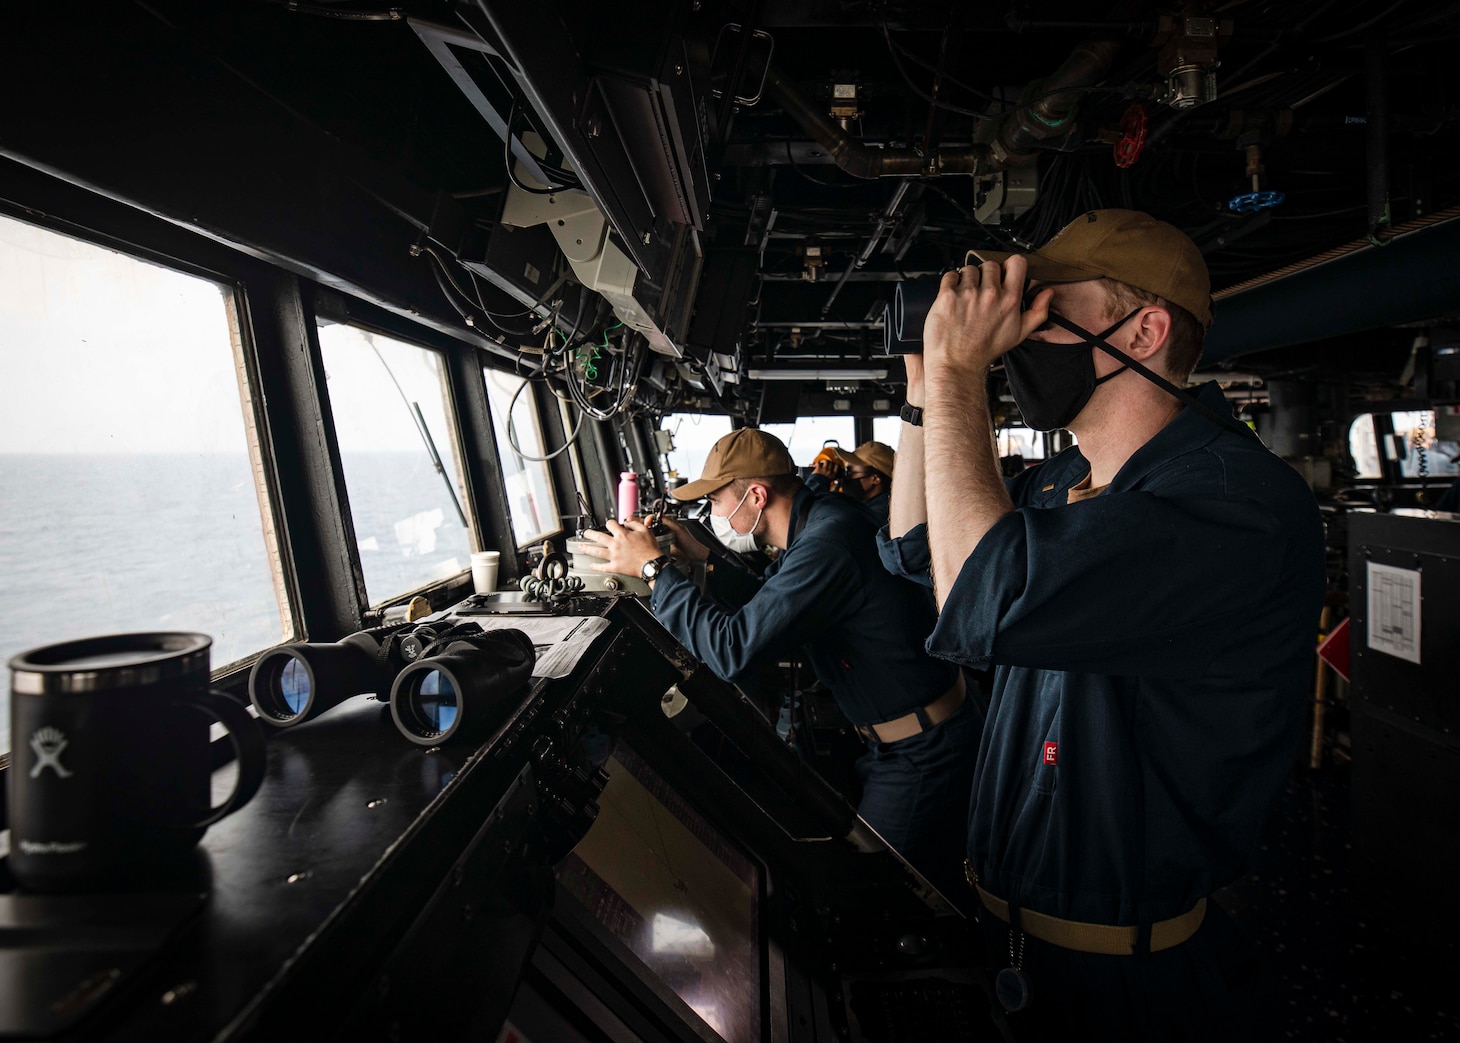 PARACEL ISLANDS, SOUTH CHINA SEA (Feb. 05, 2021) Ensign Grayson Sigler, right, from Corpus Christi, Texas, scans the horizon as Ensign Luke Dionne, from Binghamton, N.Y., looks through a telescopic alidade while standing watch in the pilot house aboard the Arleigh Burke-class guided-missile destroyer USS John S. McCain (DDG 56) as the ship conducts routine underway operations. McCain is forward-deployed to the U.S. 7th Fleet area of operations in support of security and stability in the Indo-Pacific region. (U.S. Navy photo by Mass Communication Specialist 2nd Class Markus Castaneda)